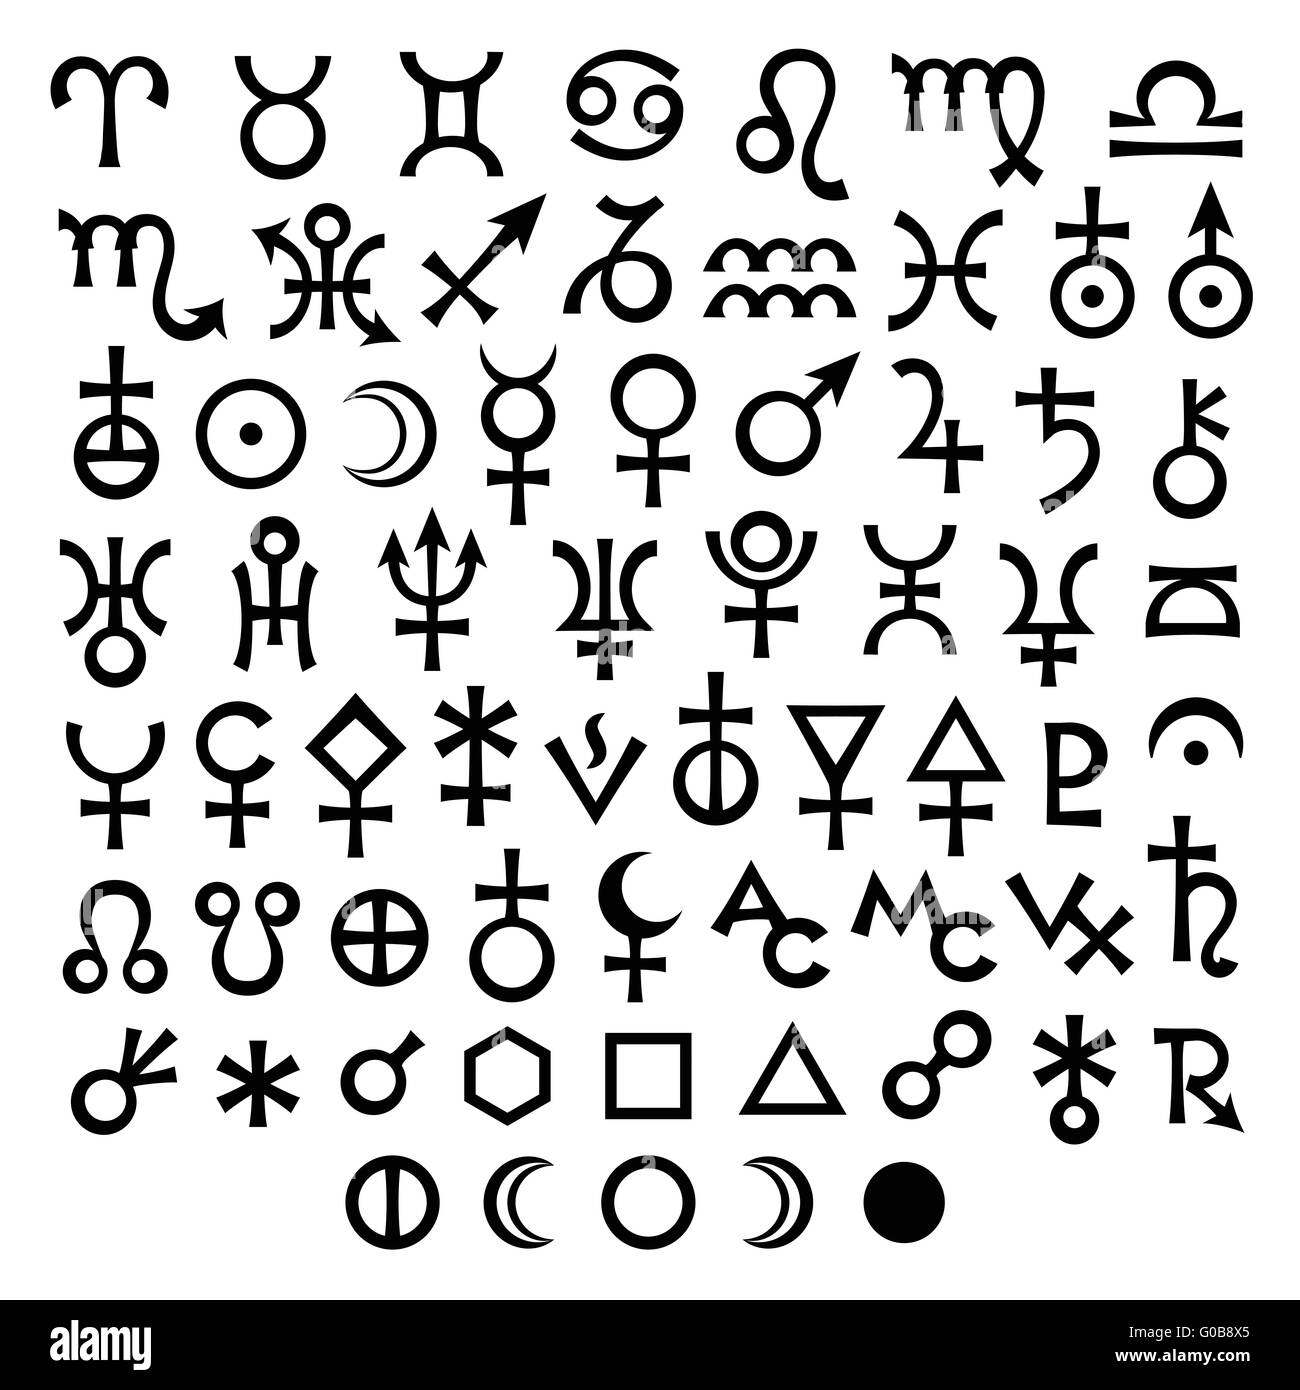 Main Astrological Signs and Symbols (The Big Set) Stock Photo